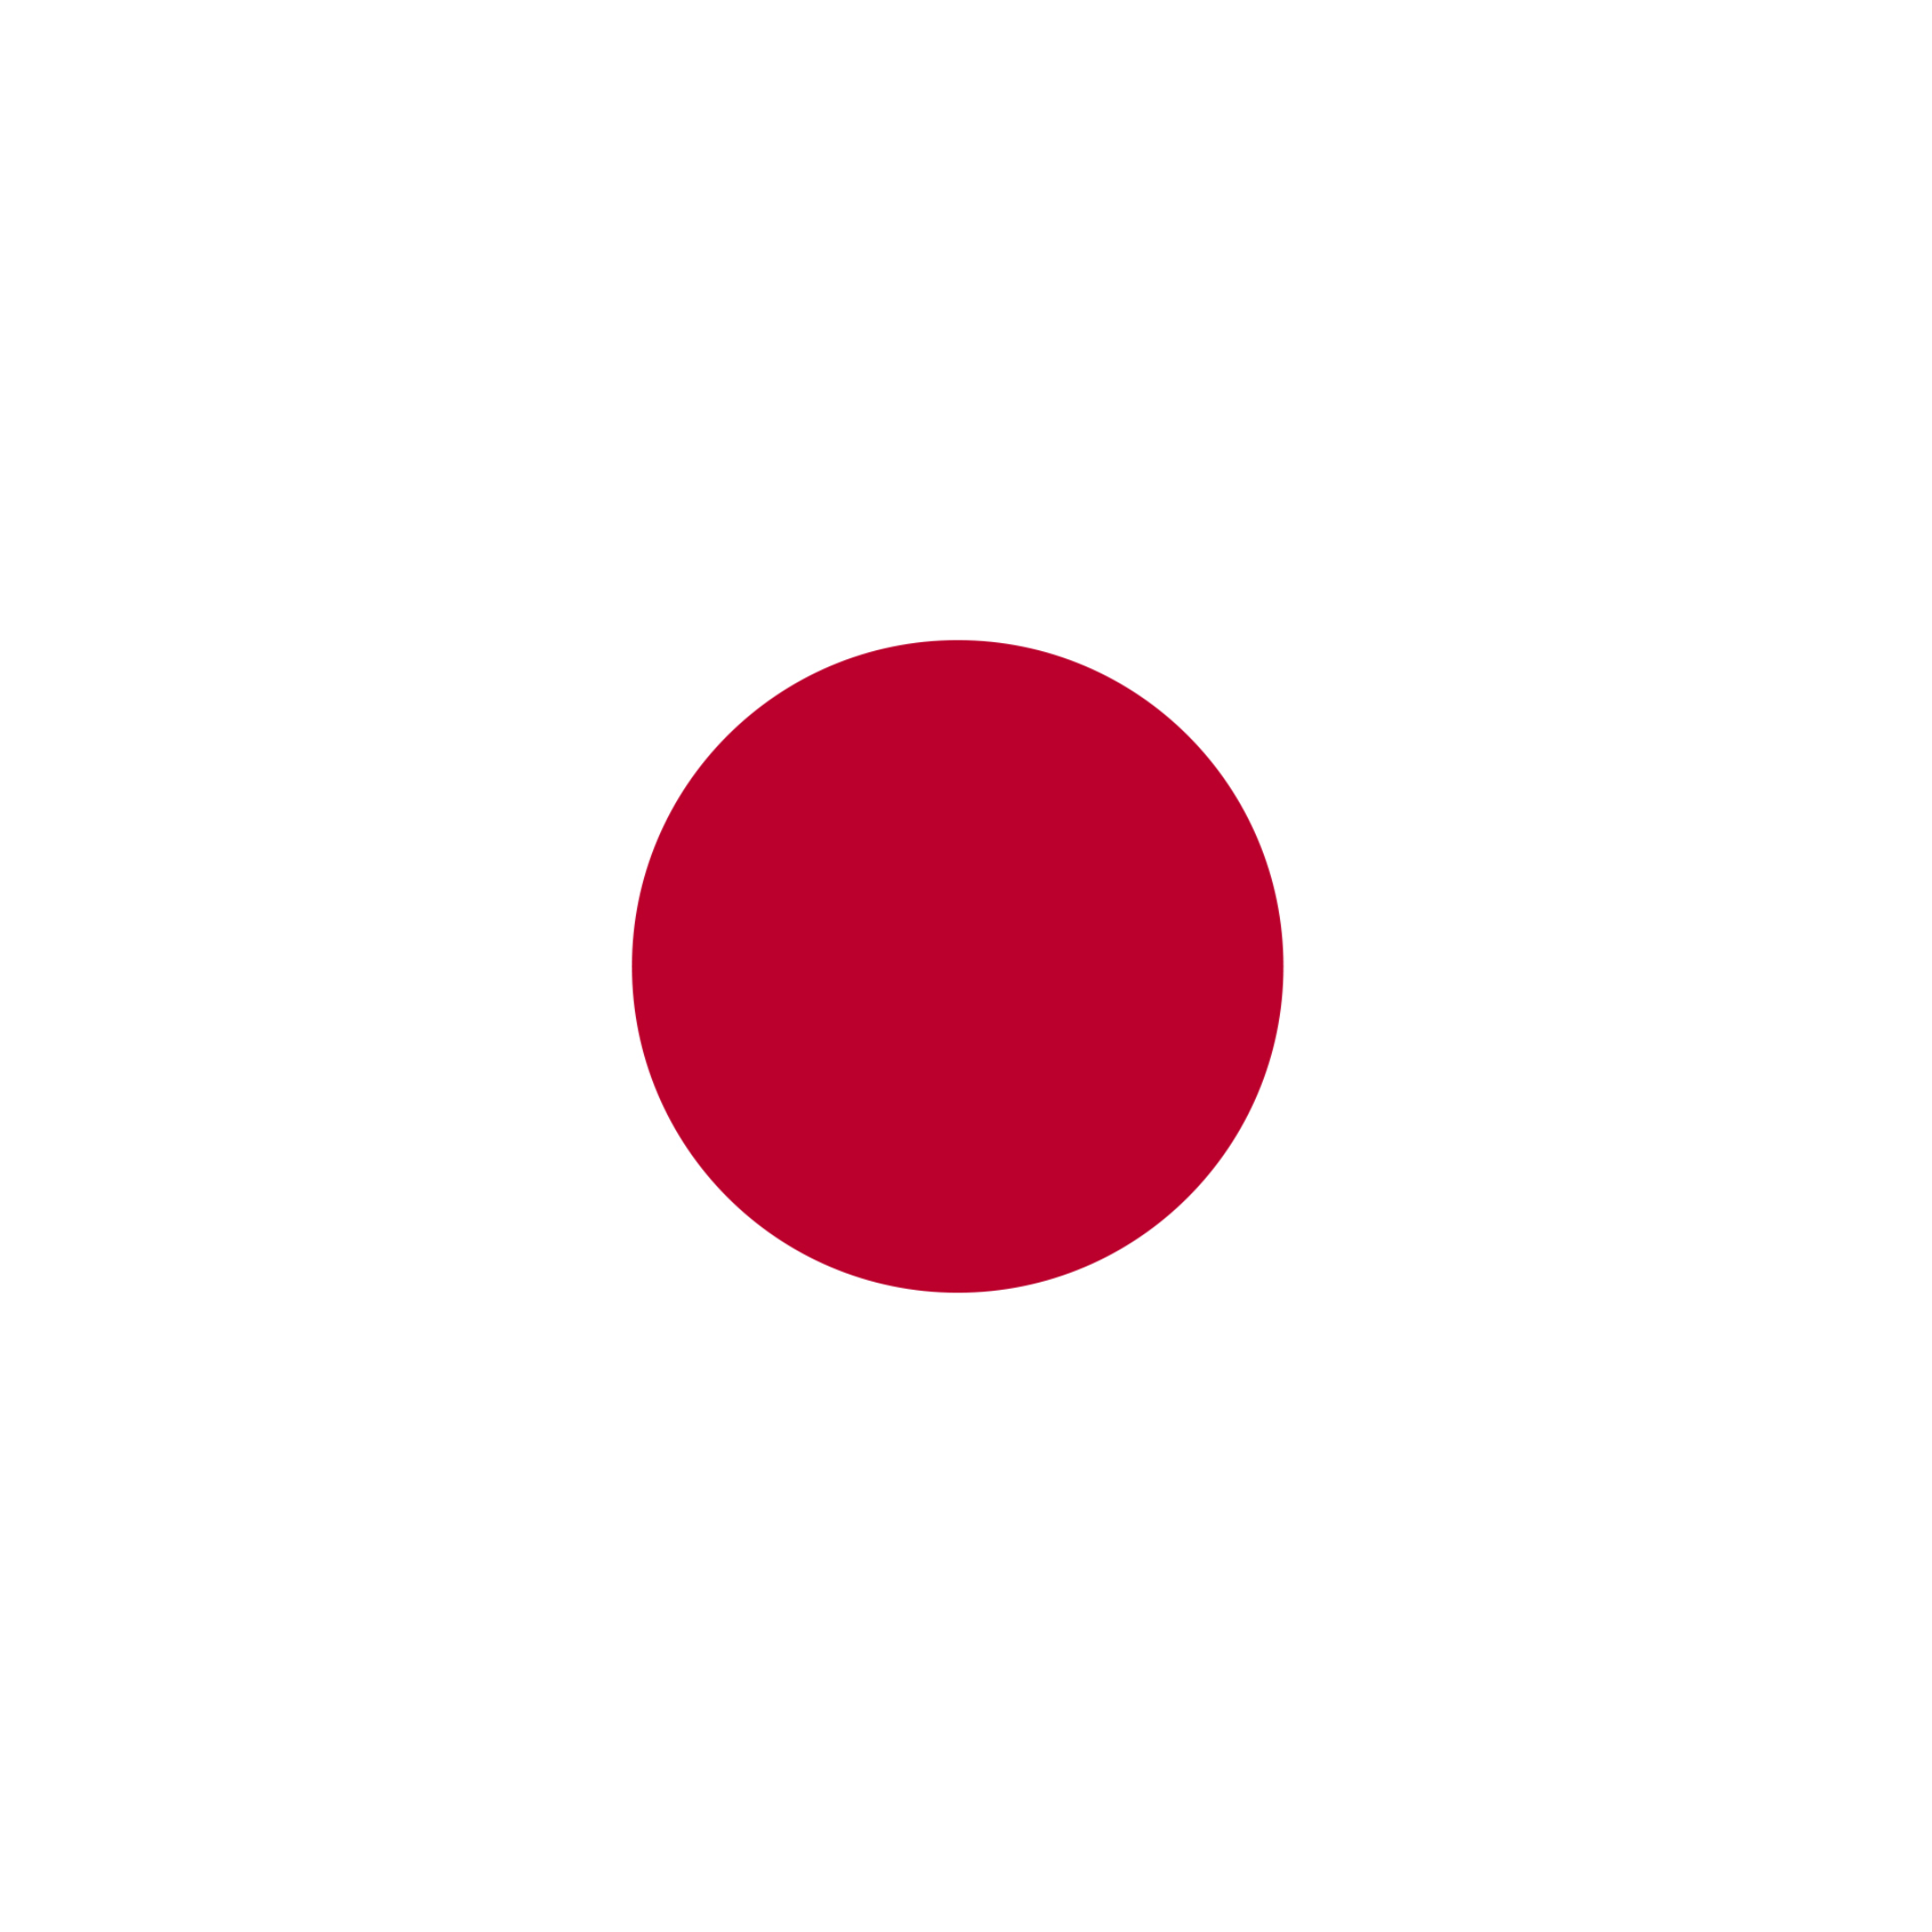 The Japanese flag is a rectangular white banner with a crimson red circle in the centre, representing the sun.